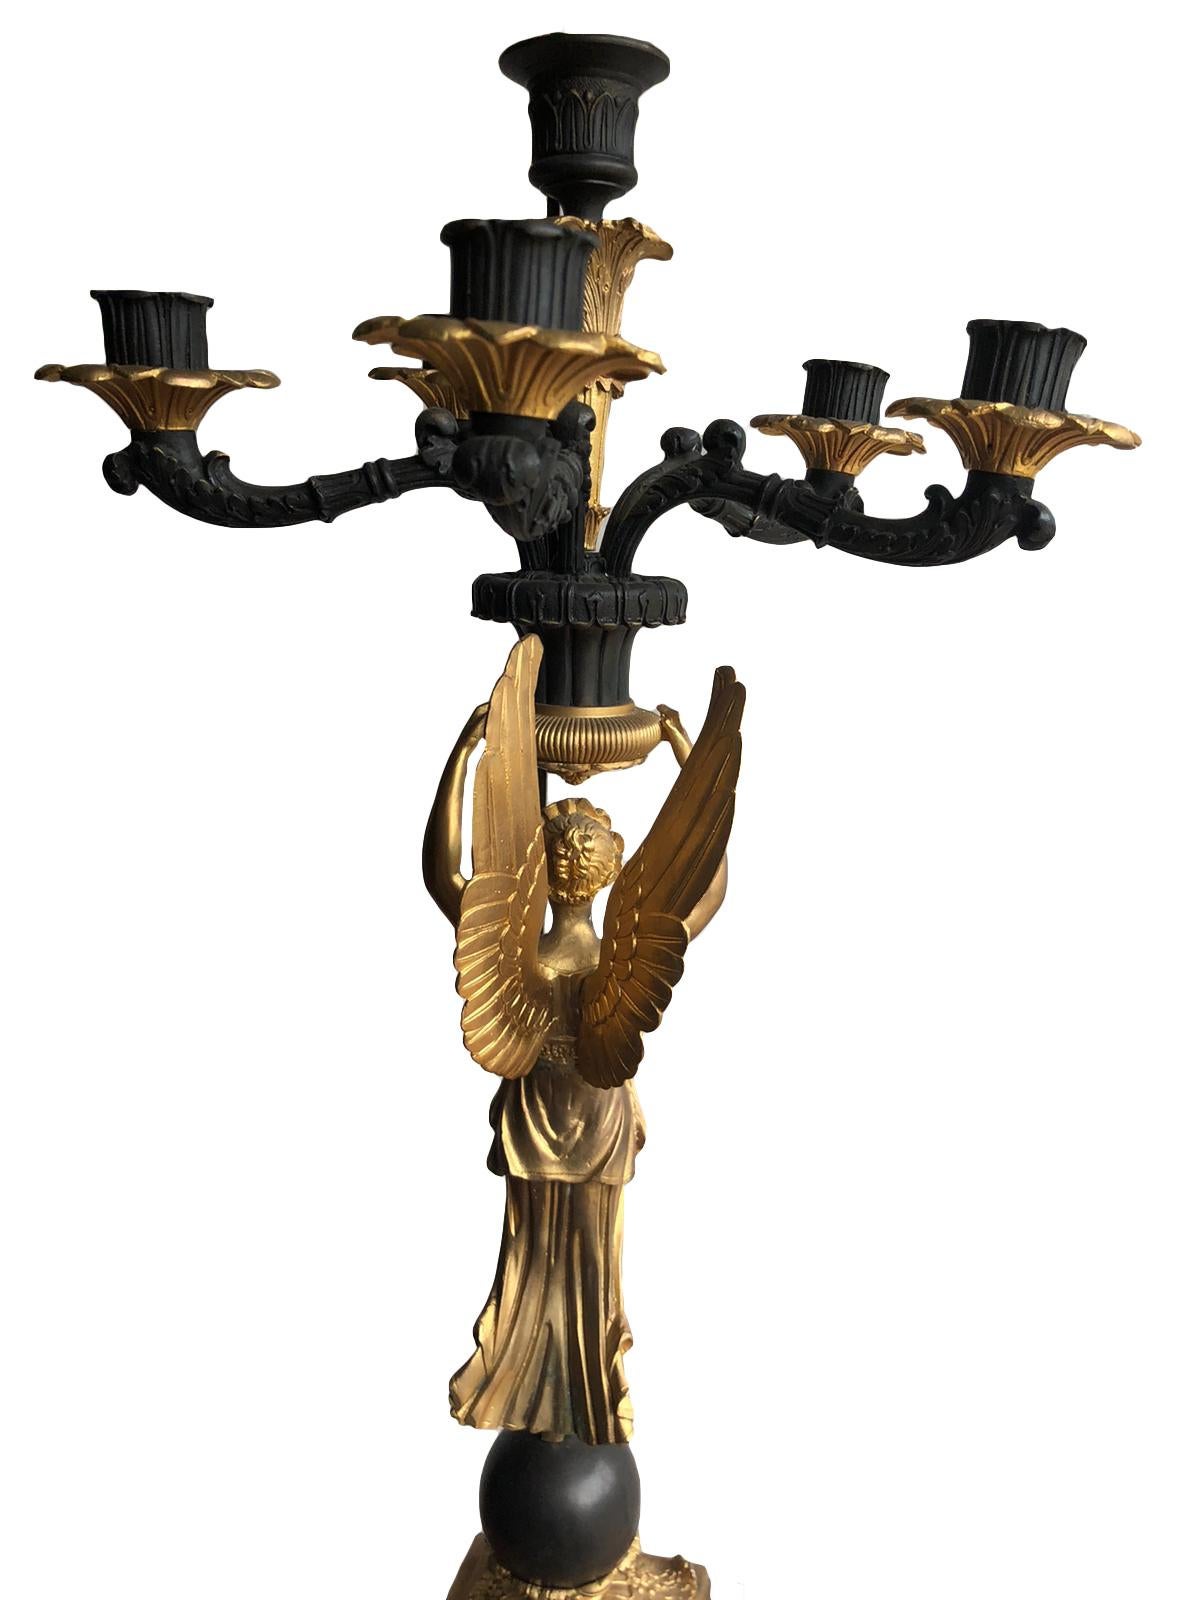 Pair of French Empires style gilt bronze angel candelabras. The quality is superb, very intricate and detailed with black and gilt bronze.

Size: Height 28 inches
Diameter 10 inches.